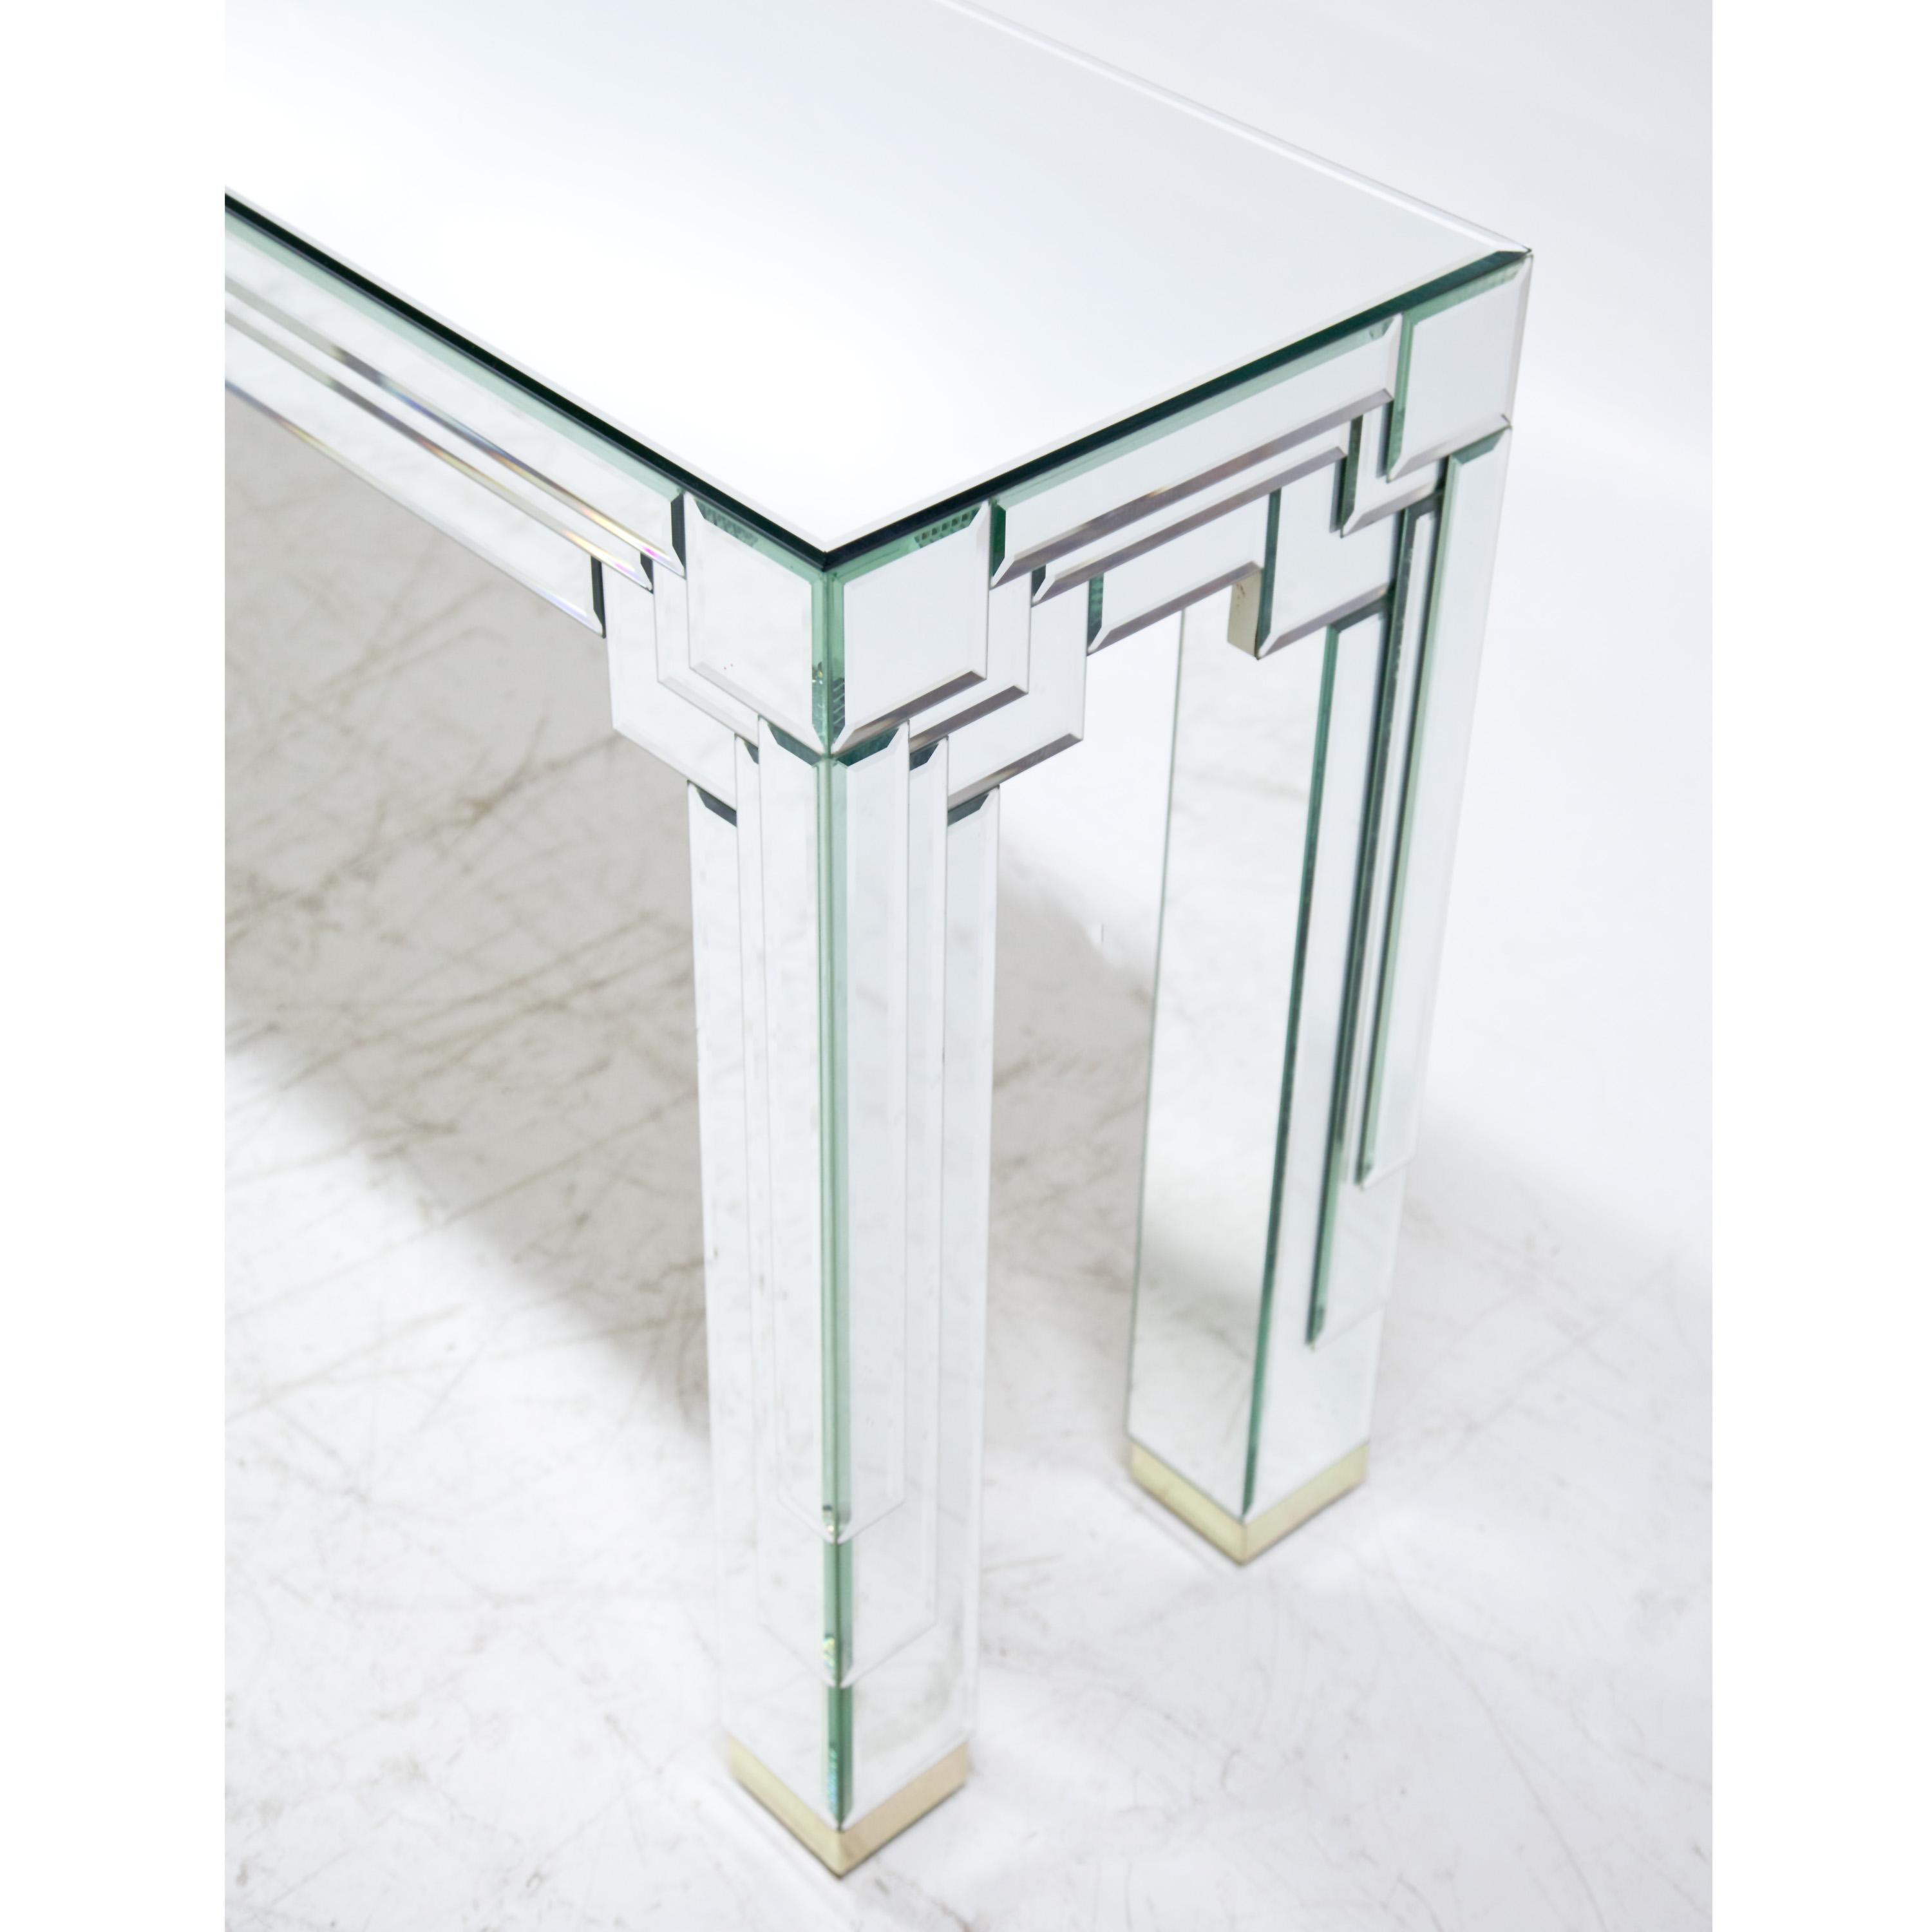 Late 20th Century Modernist Mirrored Console